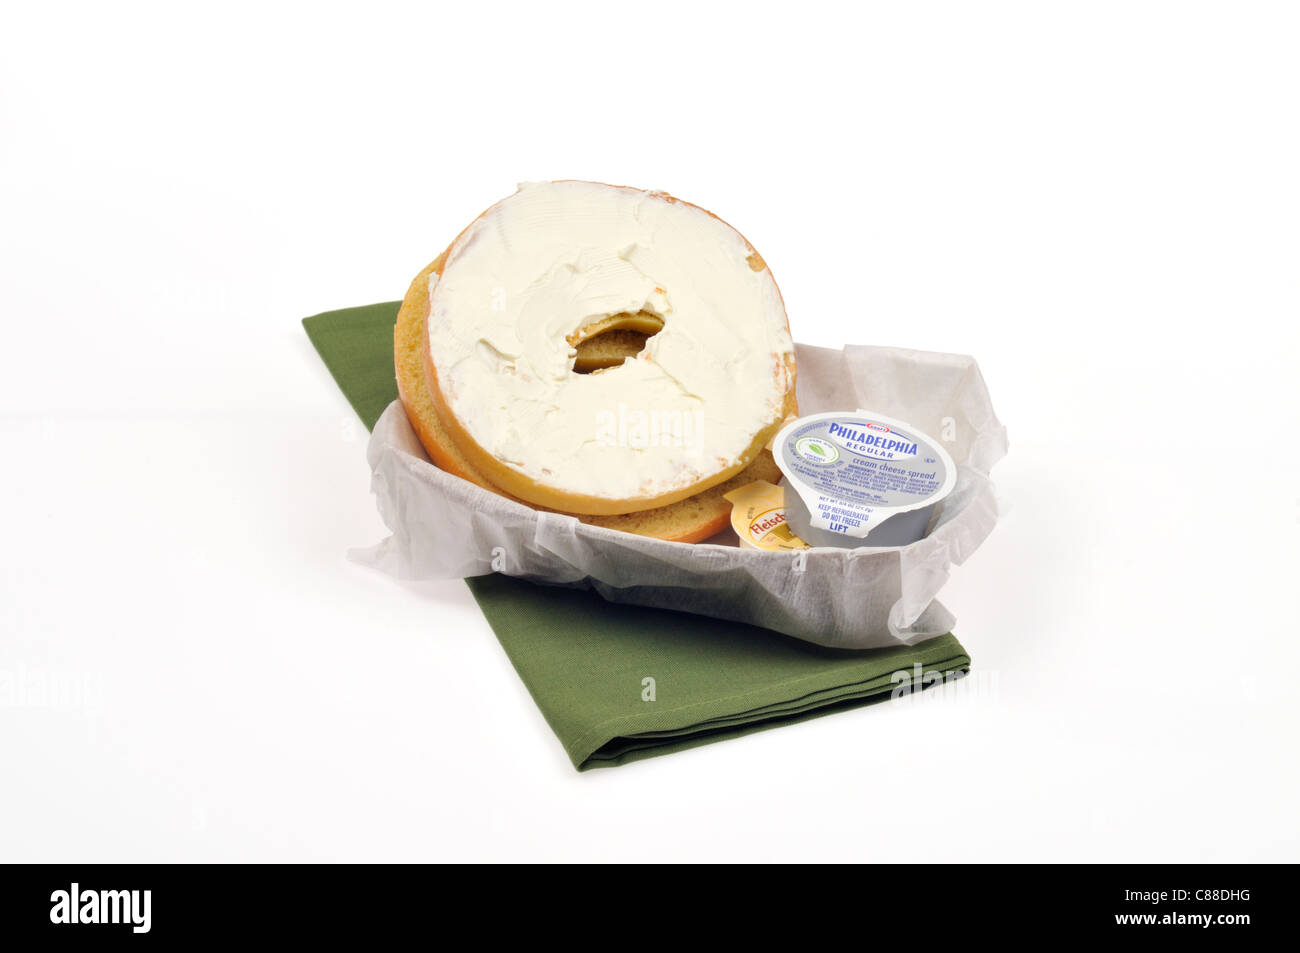 Plain bagel with philadelphia cream cheese containers in a paper basket with green napkin on white background, cut out. Stock Photo